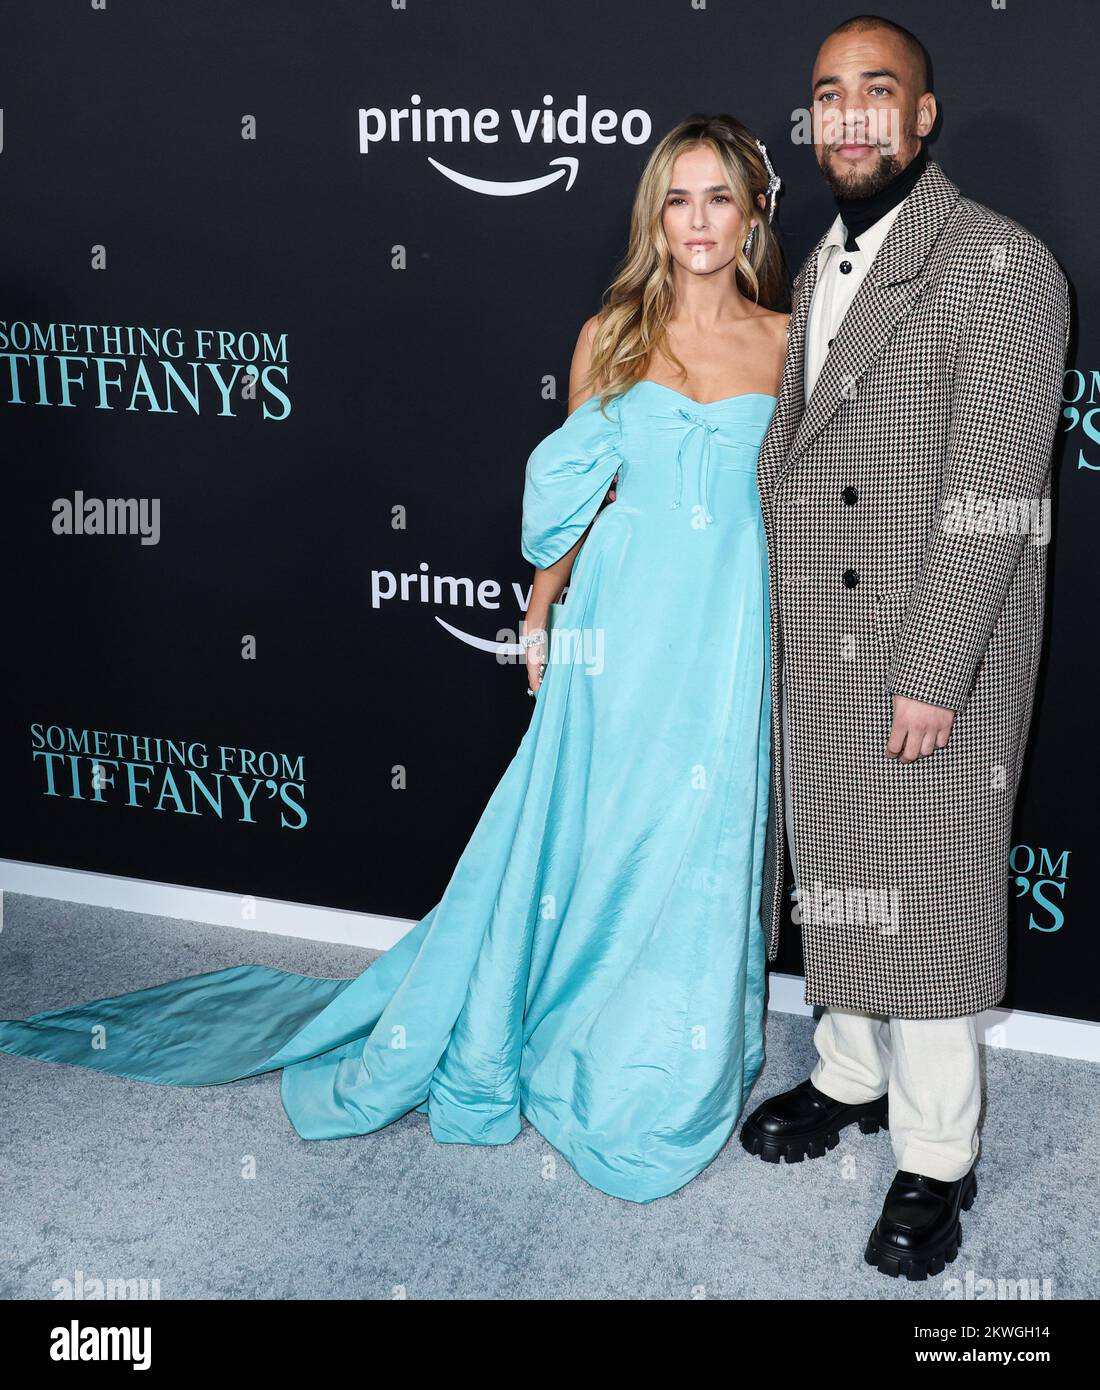 CENTURY CITY, LOS ANGELES, CALIFORNIA, USA - NOVEMBER 29: Zoey Deutch and Kendrick Sampson arrive at the Los Angeles Premiere Of Amazon Prime Video's 'Something From Tiffany's' held at AMC Century City 15 at Westfield Century City on November 29, 2022 in Century City, Los Angeles, California, United States. (Photo by Xavier Collin/Image Press Agency) Stock Photo